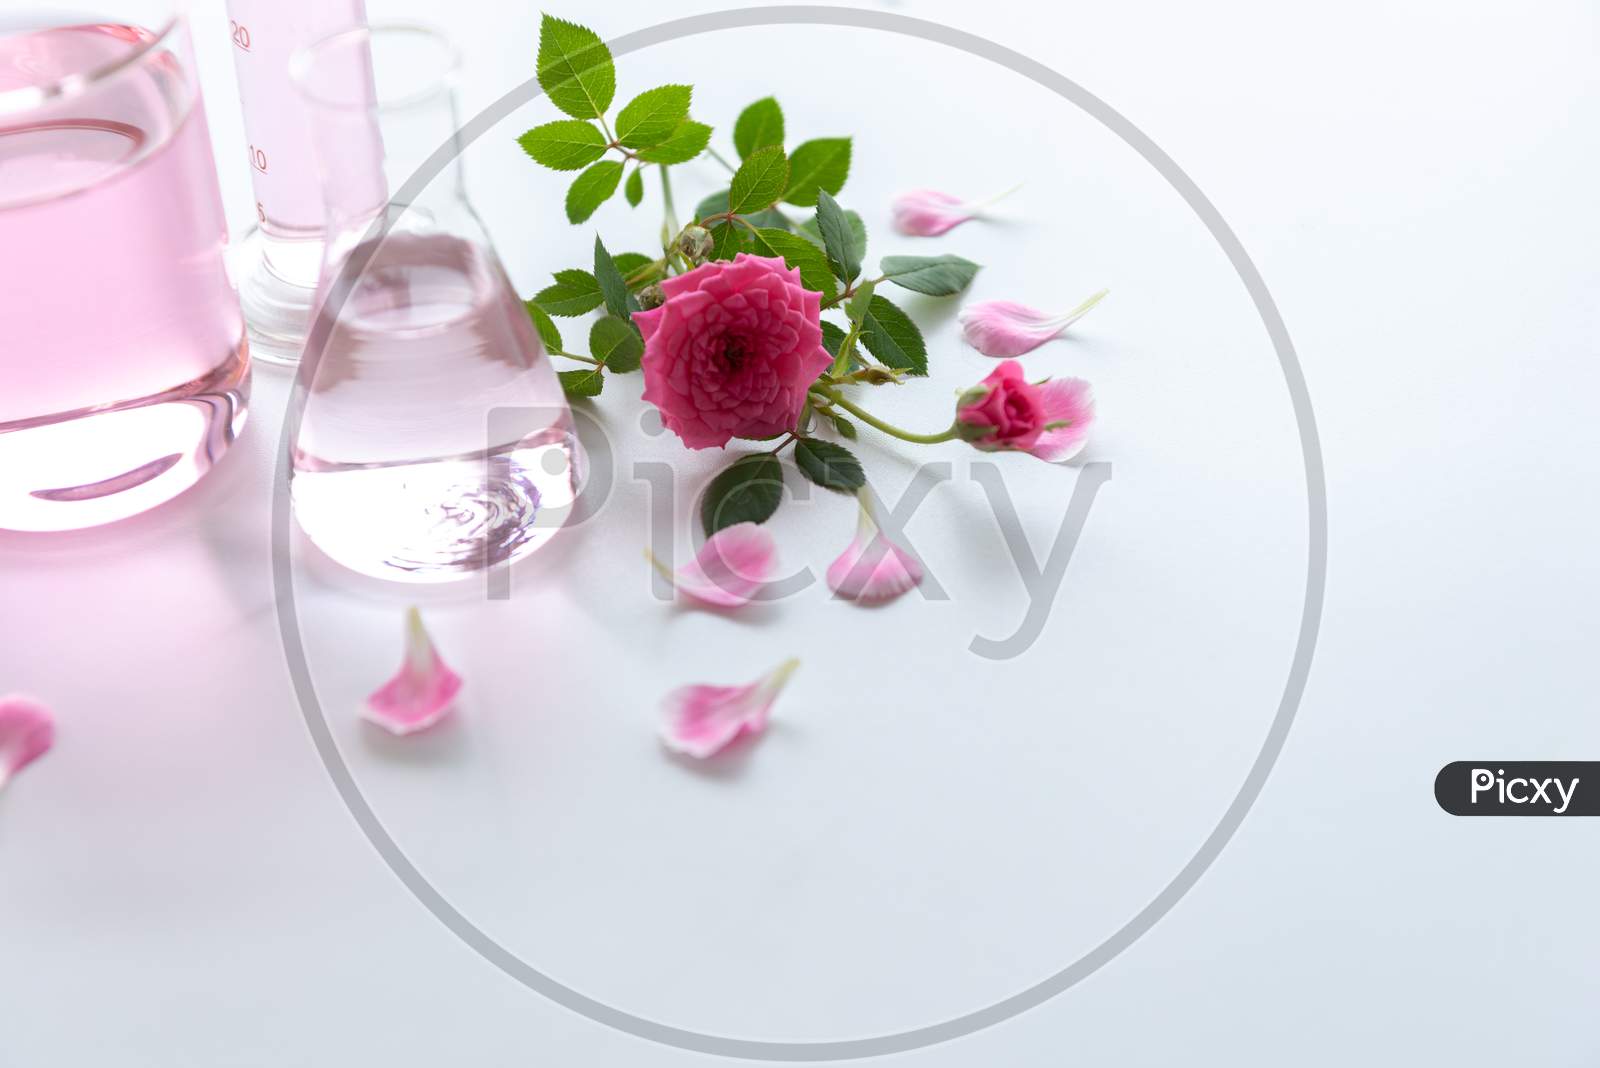 Rose Spa Treatments On White Wooden Table. Healthcare And Body Therapy Massage Relaxation Concept. Beauty And Healthy Theme. Pure Natural Extract And Medical Theme.